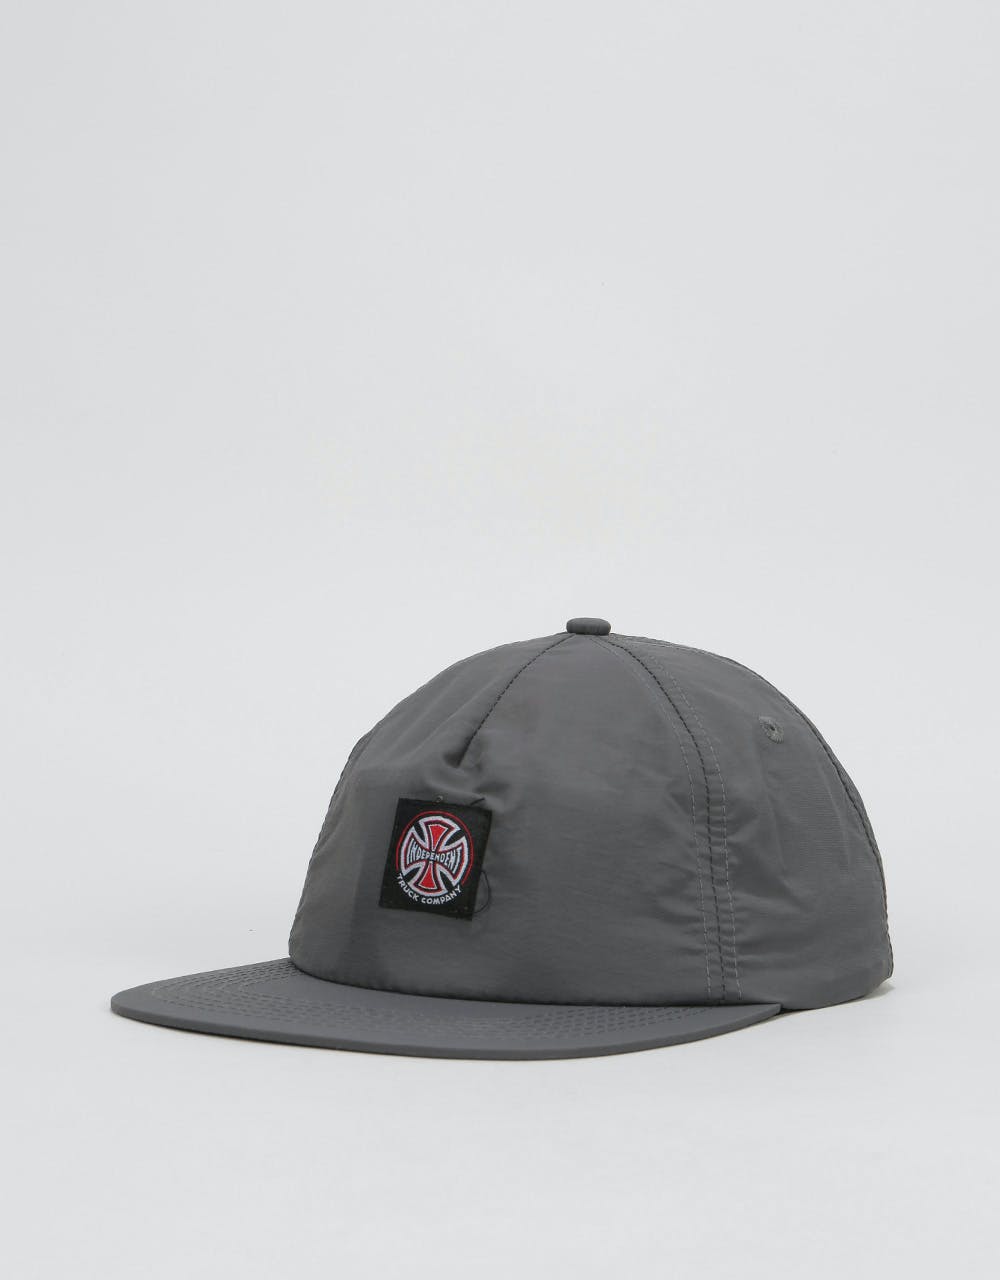 Independent Truck Co. Label Strapback Cap - Charcoal Heather